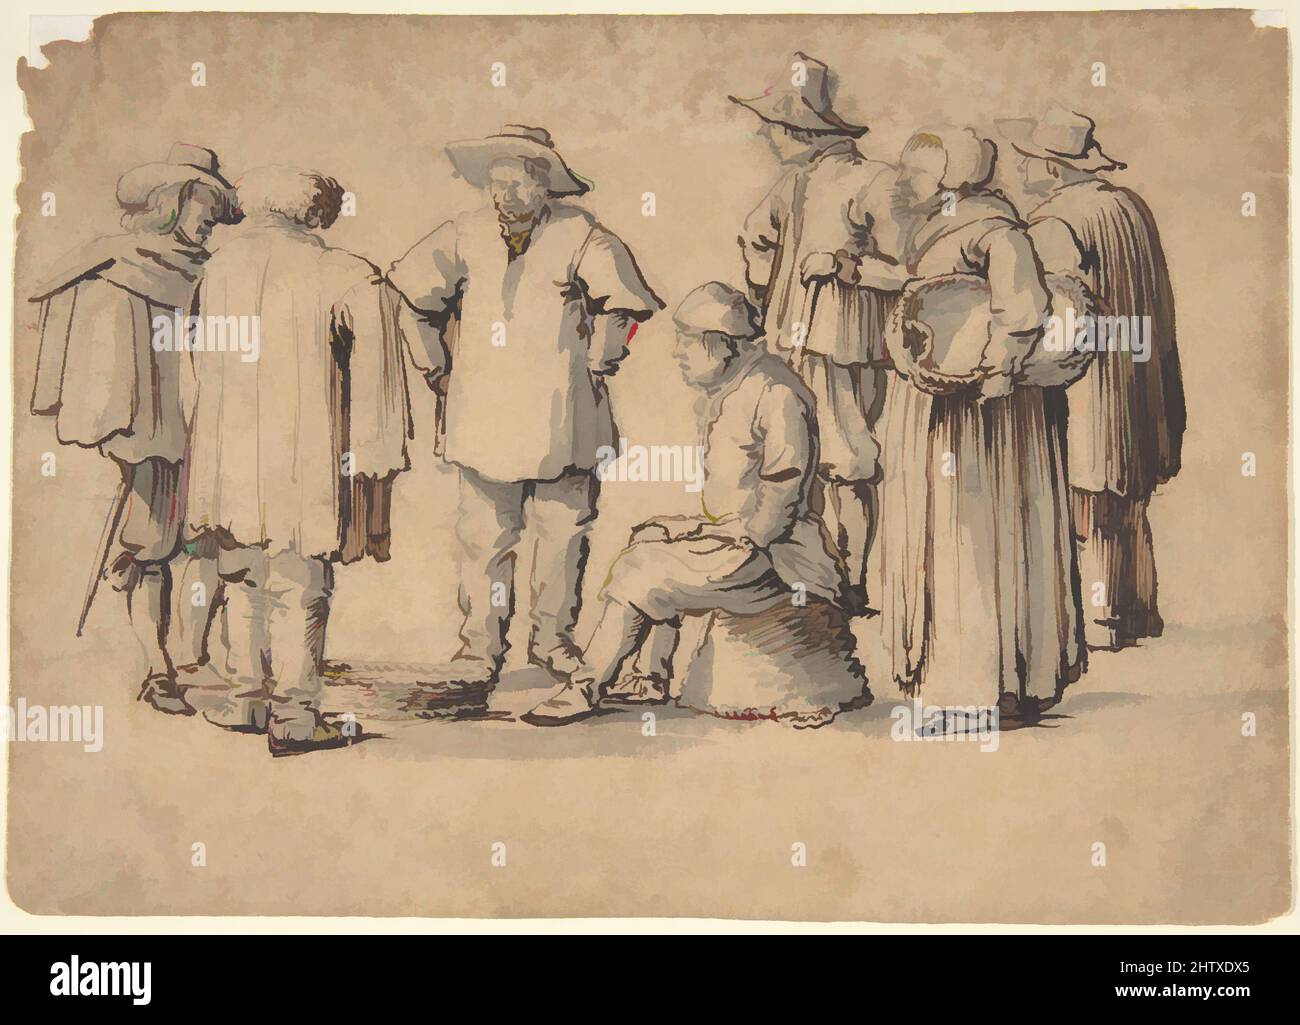 Art inspired by Peasants, 17th century, Pen and brown ink, brush and gray wash, sheet: 5 3/4 x 8 1/8 in. (14.6 x 20.6 cm), Drawings, Willem van de Velde I (Dutch, Leiden 1611–1693 London, Classic works modernized by Artotop with a splash of modernity. Shapes, color and value, eye-catching visual impact on art. Emotions through freedom of artworks in a contemporary way. A timeless message pursuing a wildly creative new direction. Artists turning to the digital medium and creating the Artotop NFT Stock Photo